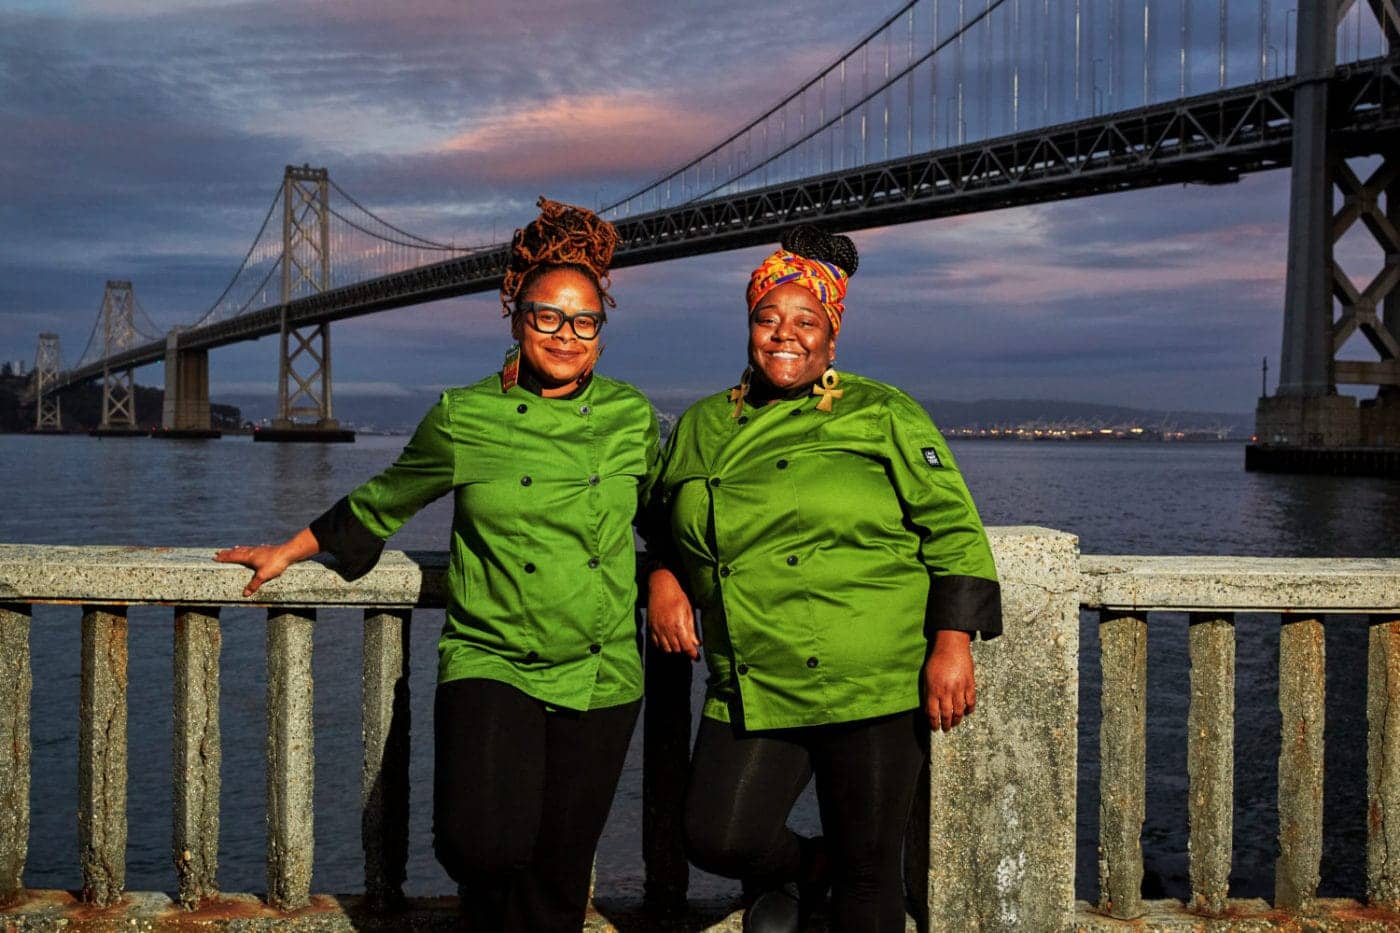 vegan-hood-chefs-ronicia-johnson-hassan-andrhima-calloway-1400x933 fresco vegan hood chefs are taking their taste buds by storm local news and opinions 